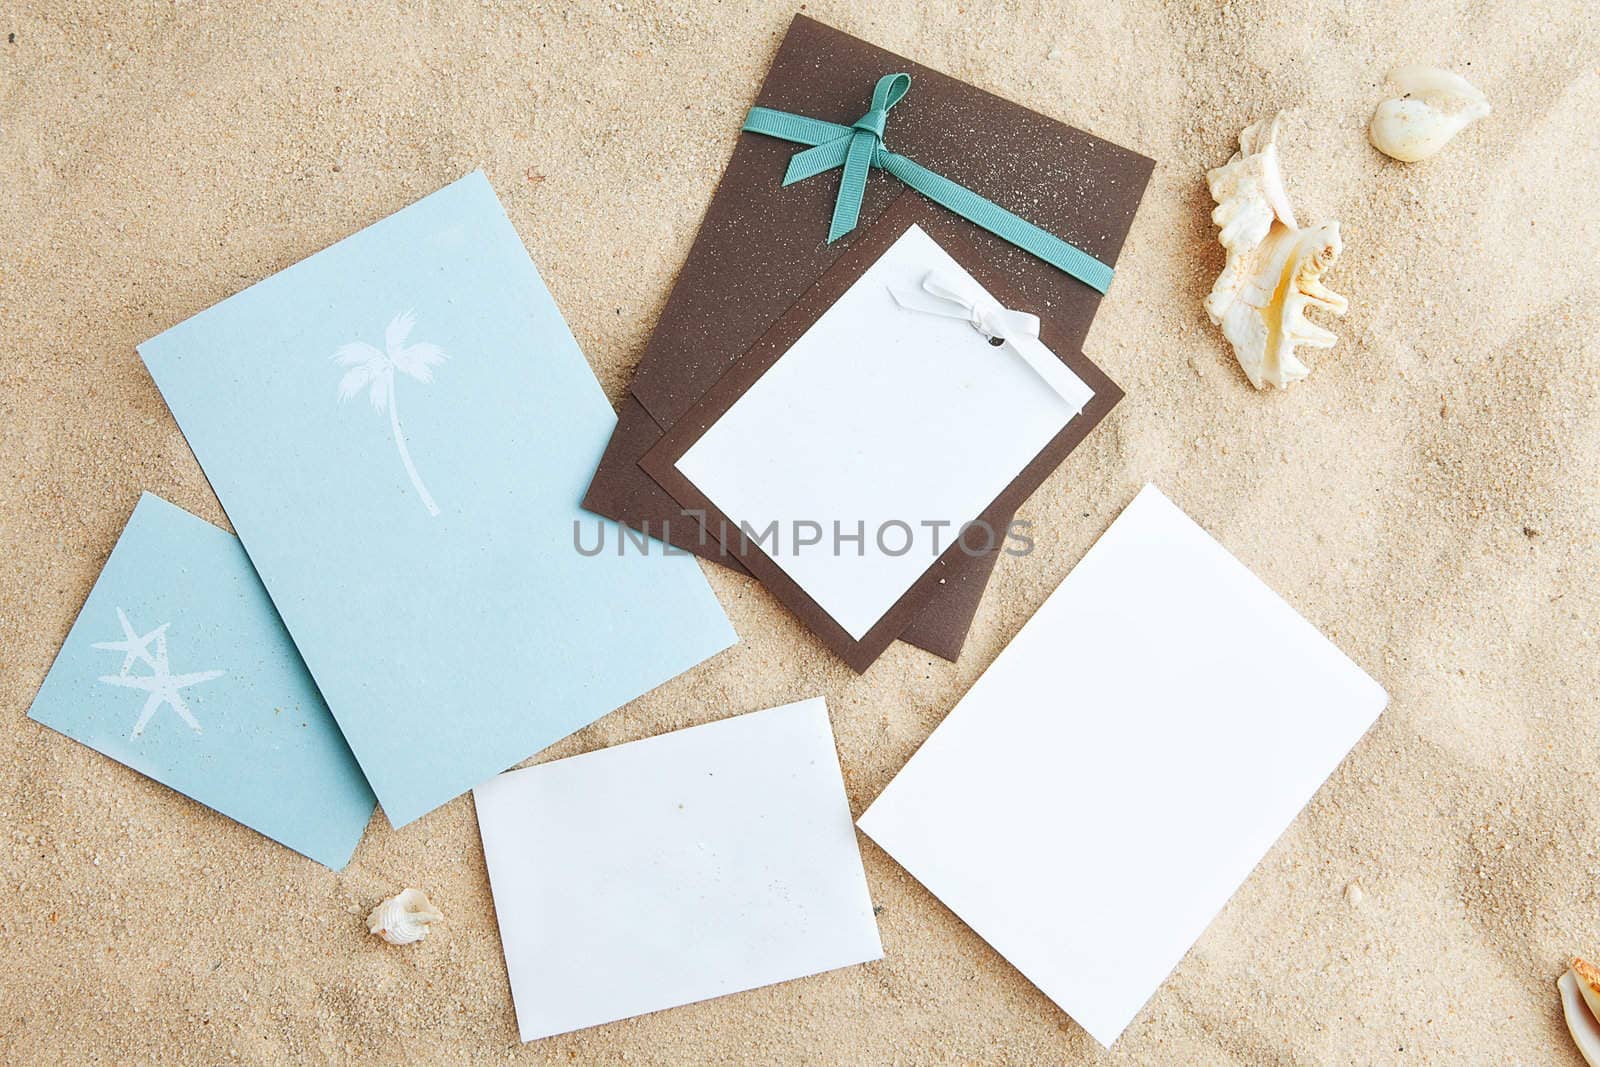 empty cards on sand. free space for your text and images.